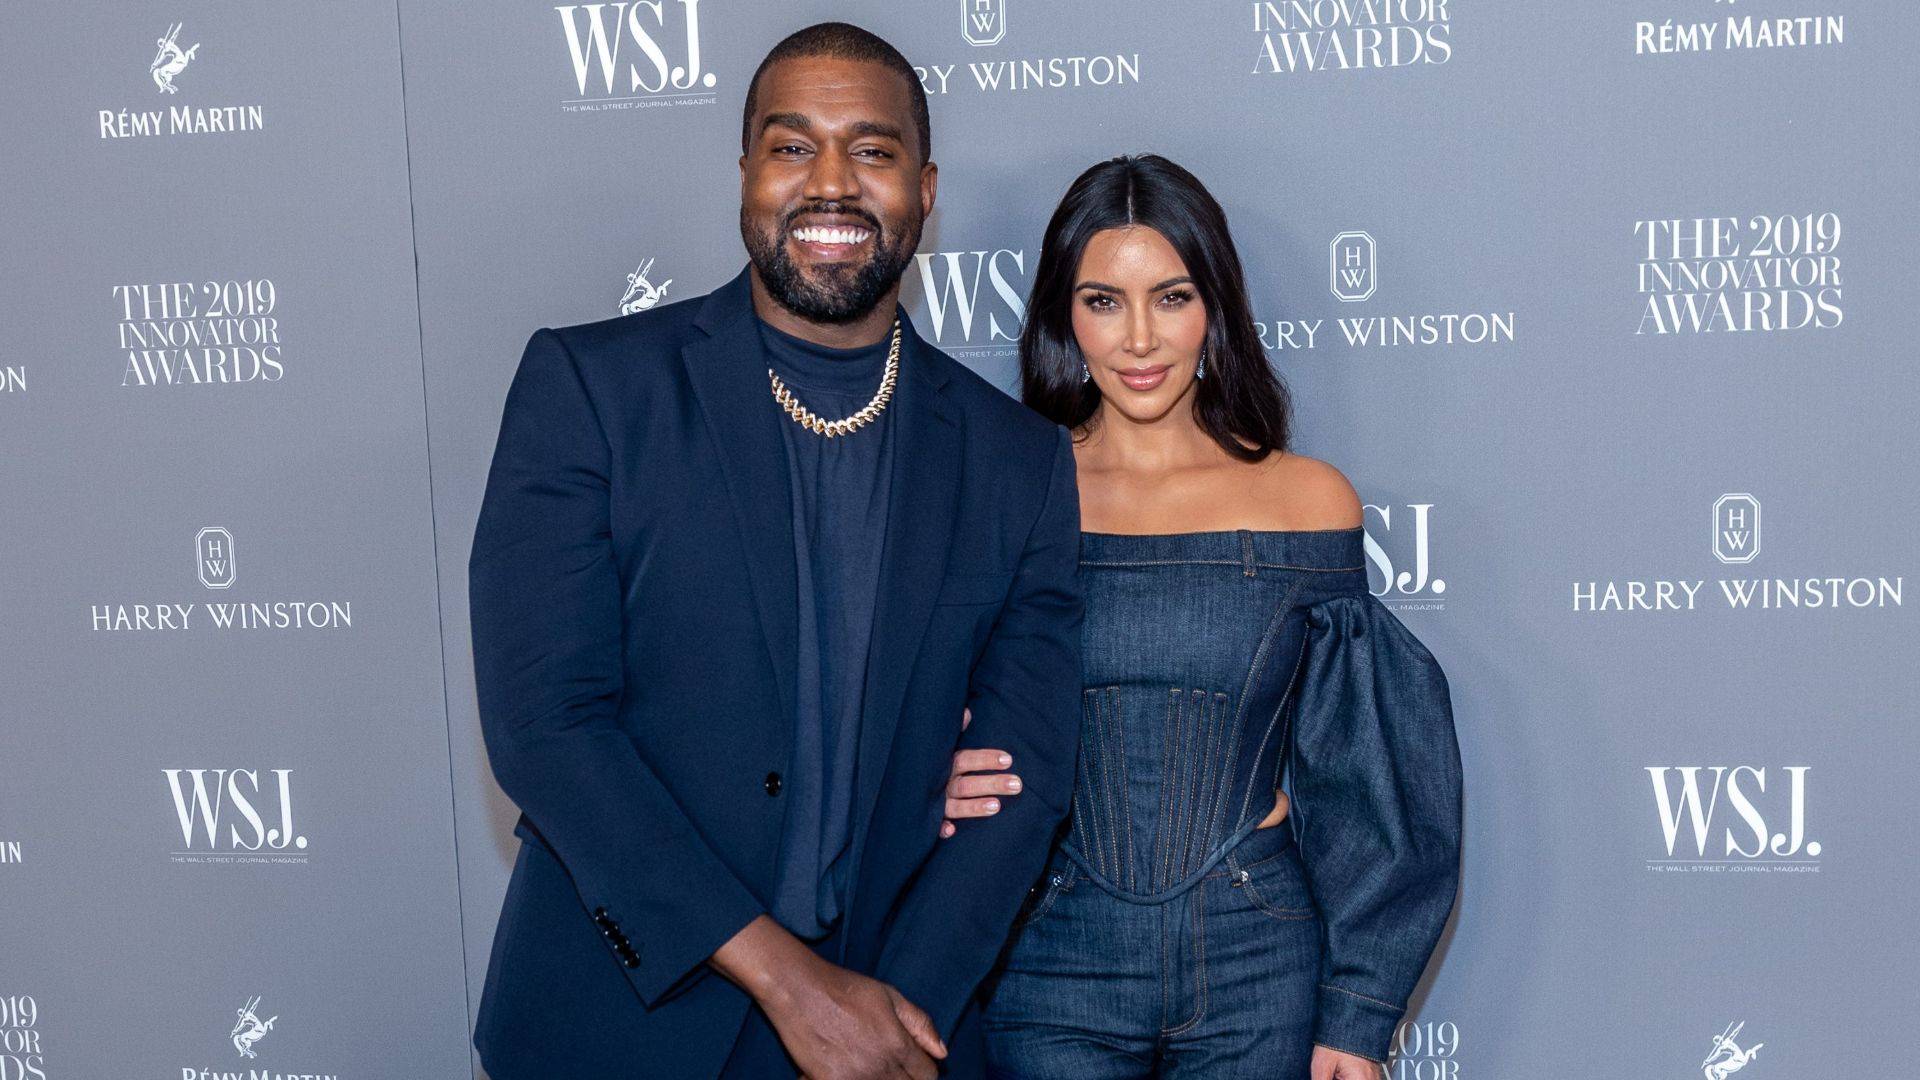 Kim Kanye on red carpet before marriage split smiling for camera in 2019 navy outfits matching